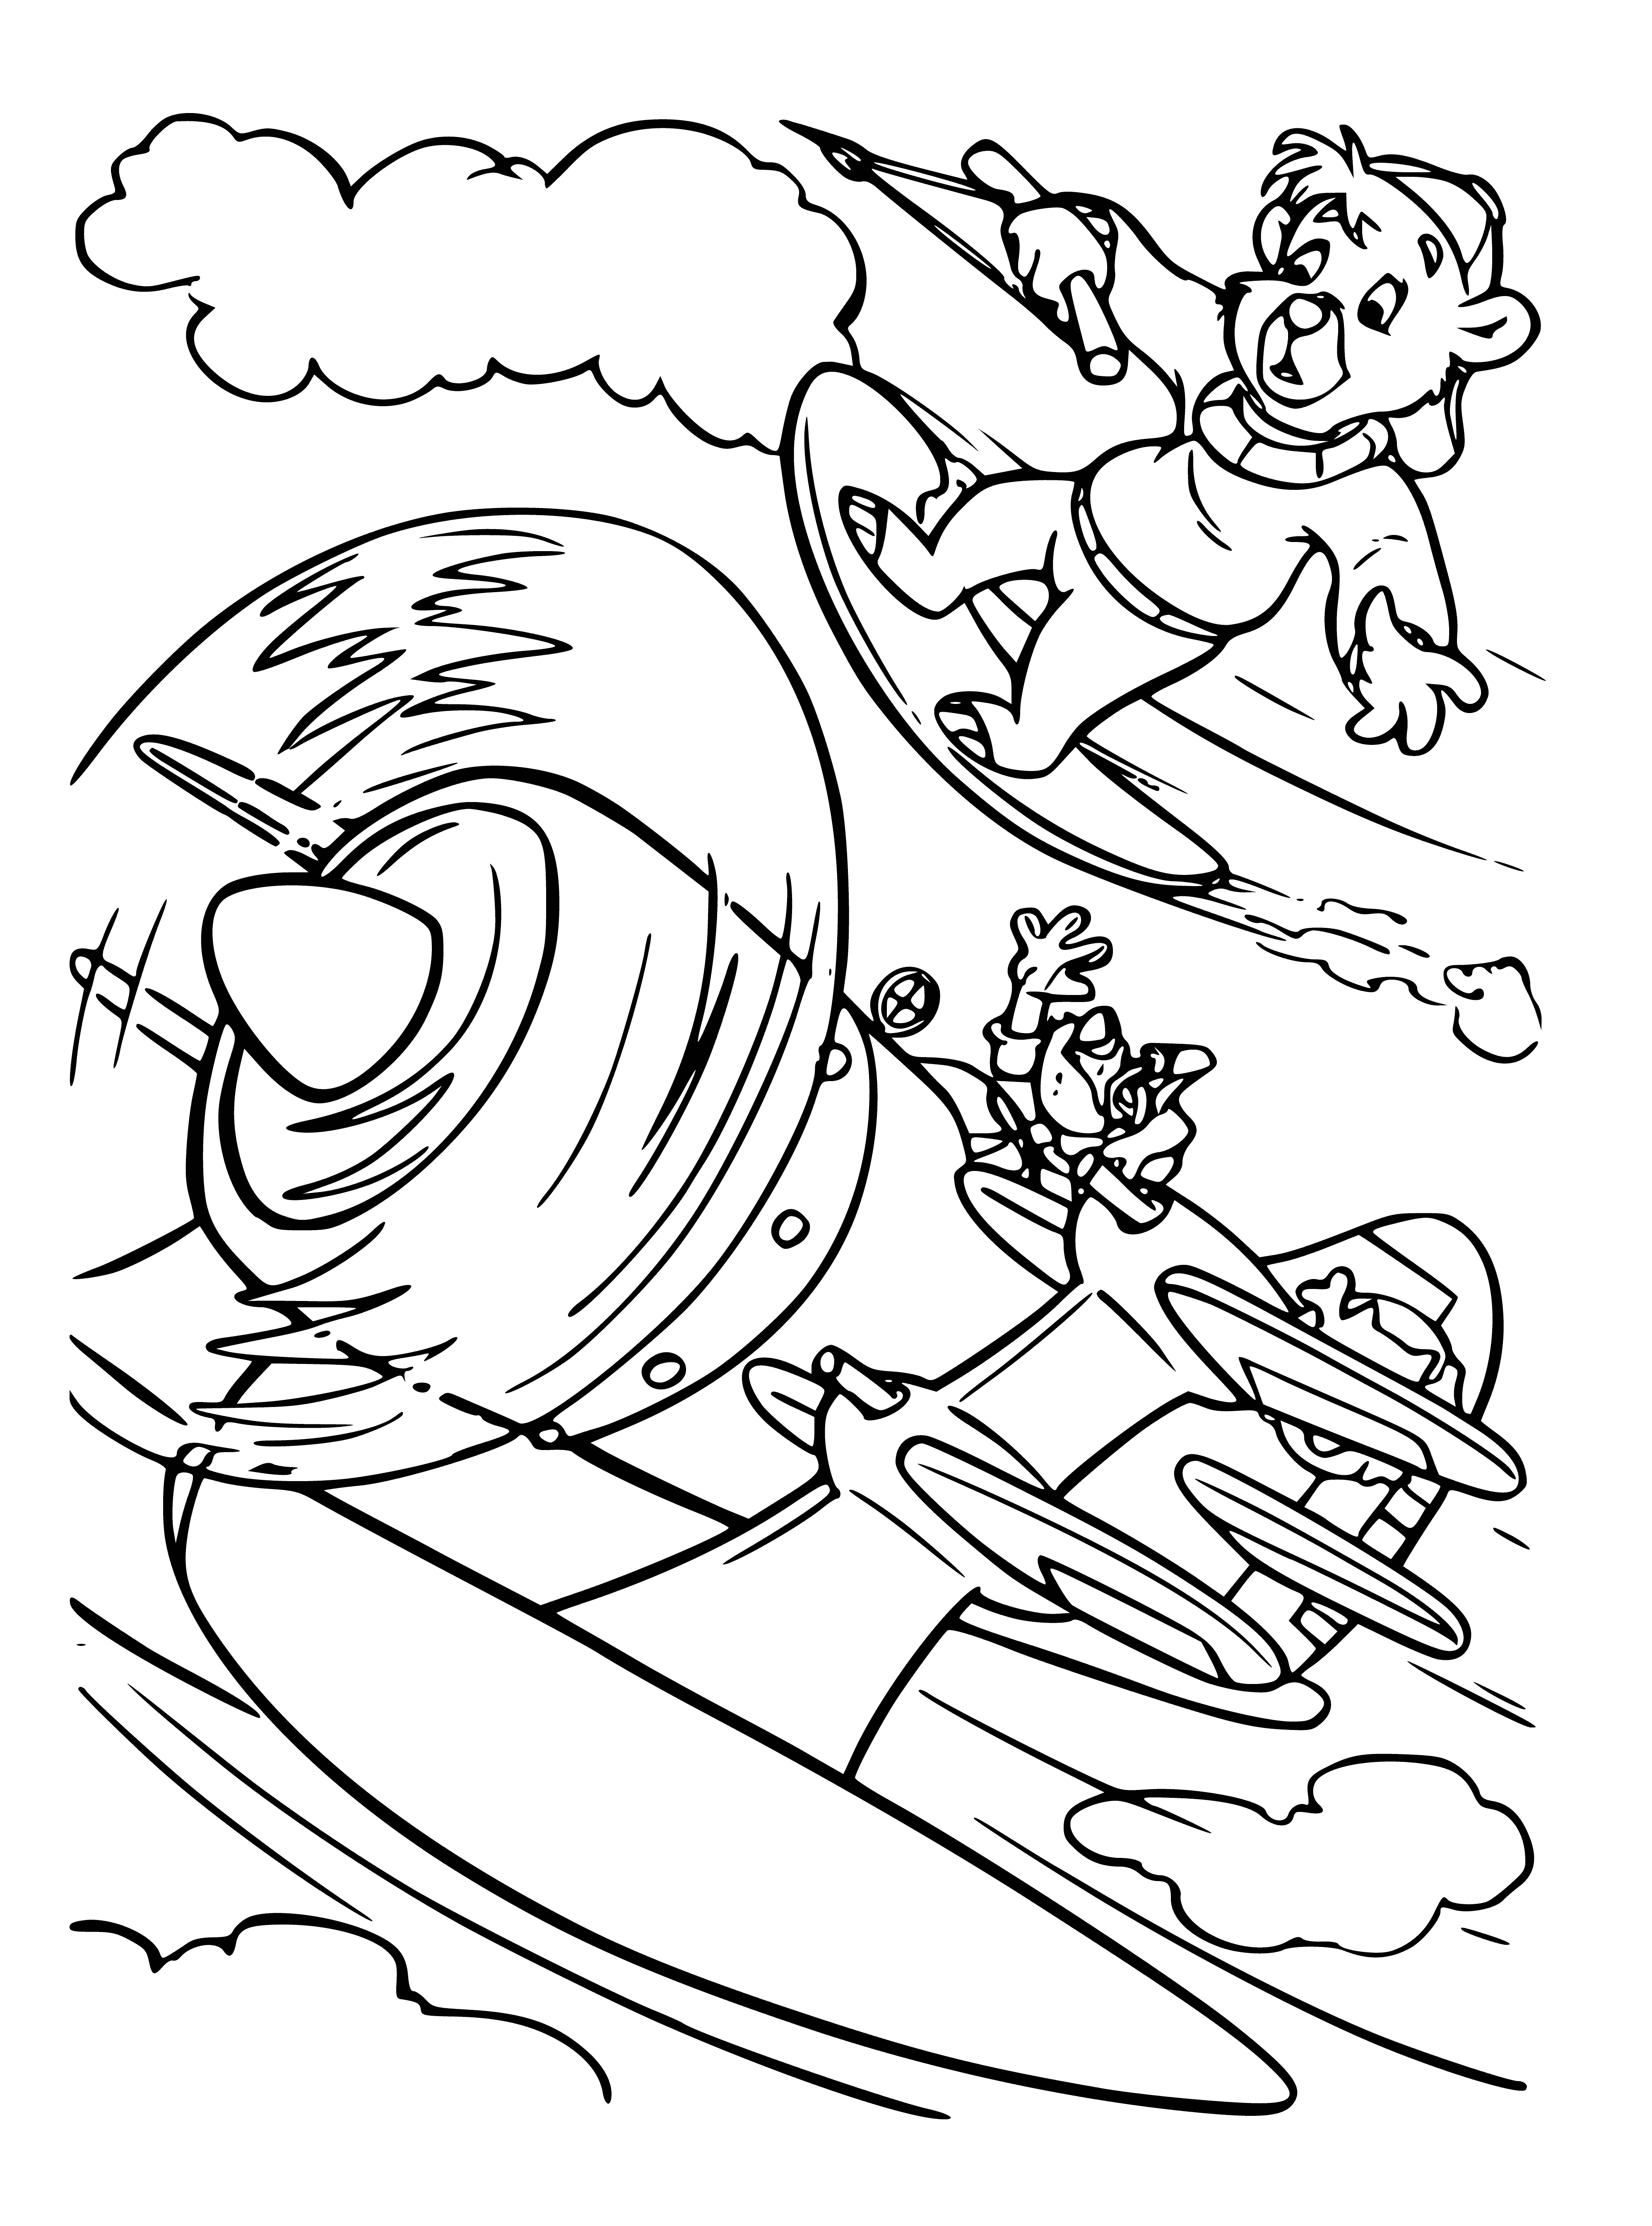 coloring page: Oil spill endangers whale, choking & making it difficult to breathe; surrounded by oil & struggling to be free.